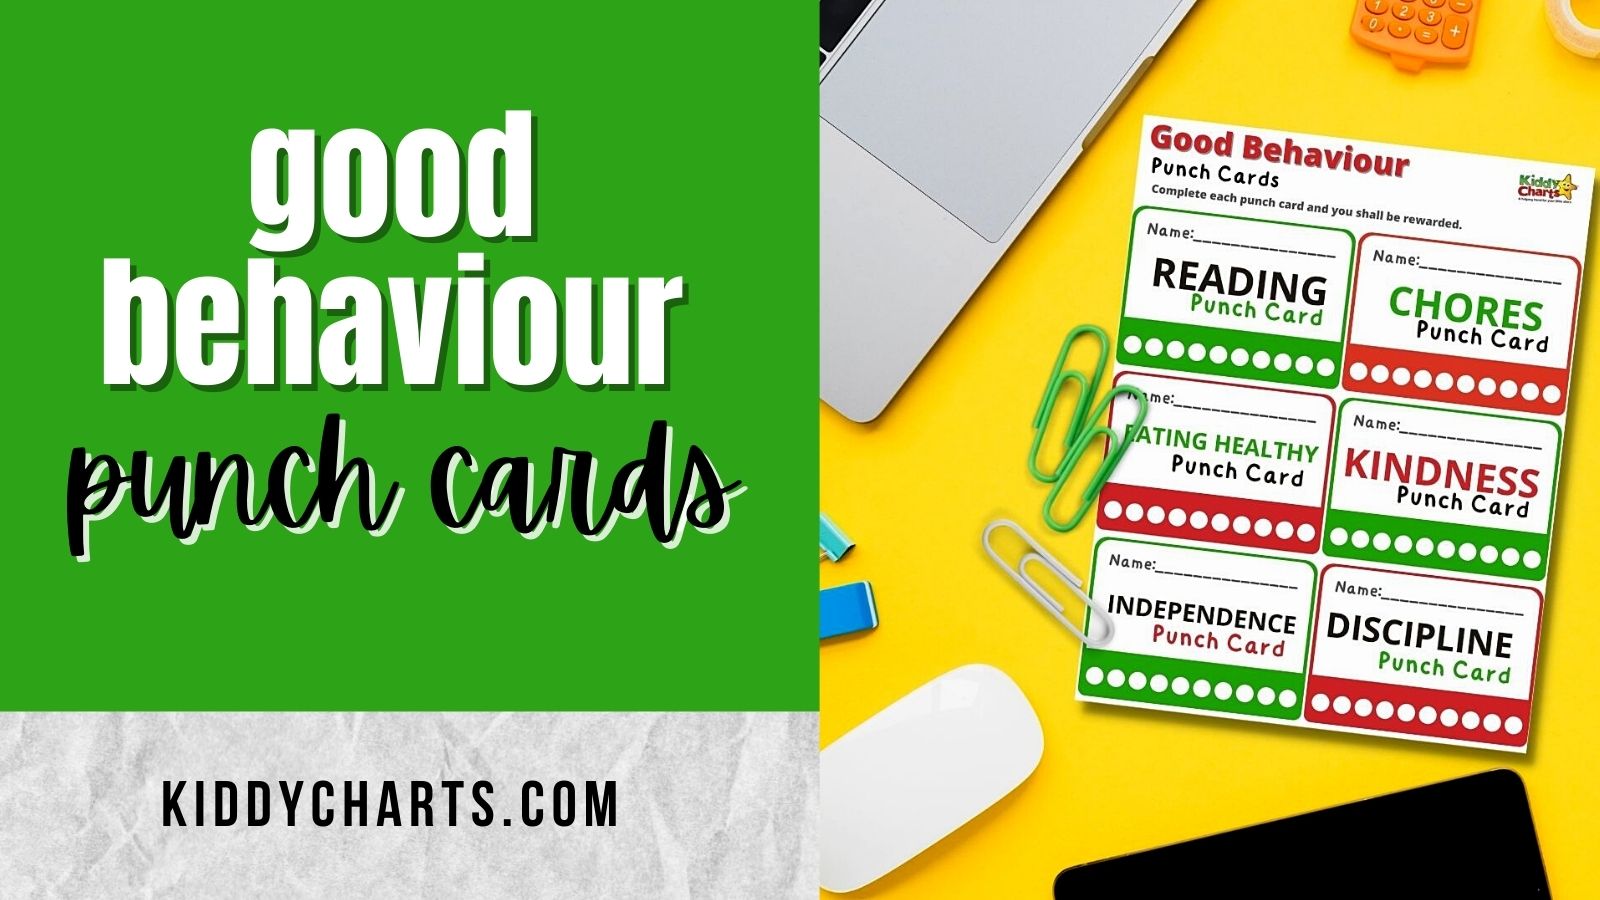 Good behavior punch cards to download free today